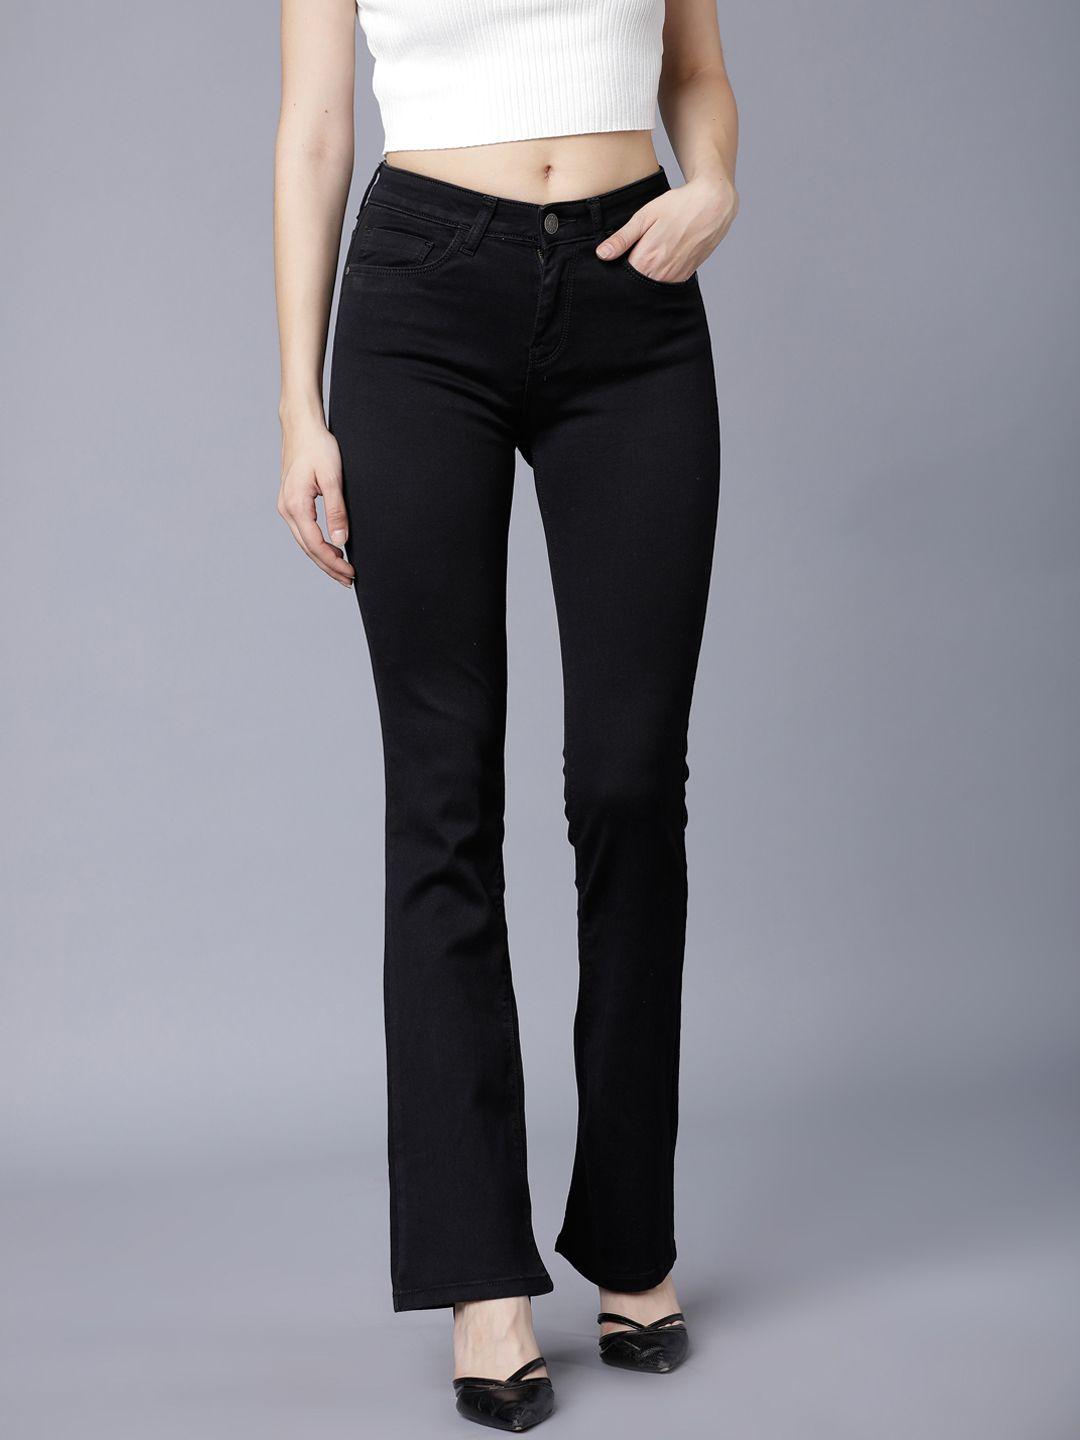 tokyo-talkies-women-black-bootcut-mid-rise-clean-look-stretchable-jeans